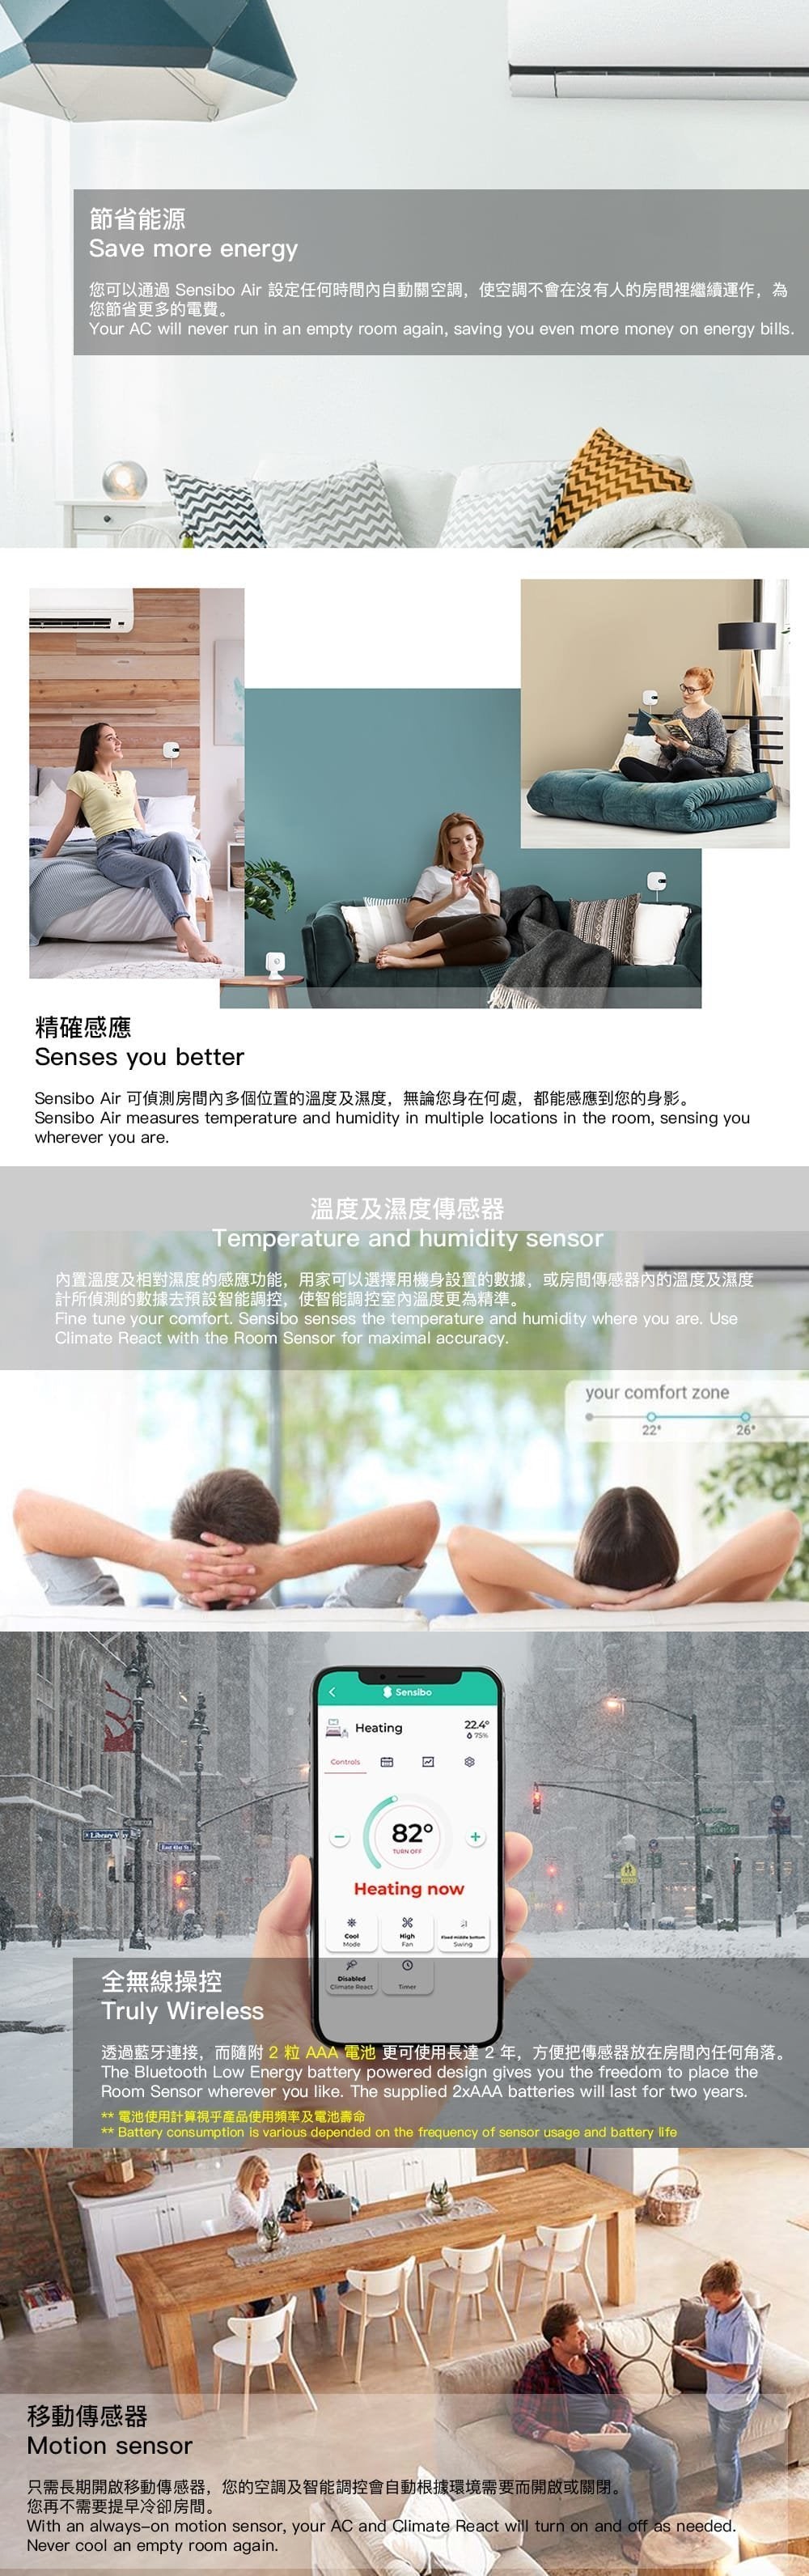 Sensibo - AIR smart air conditioner remote control - equipped with room sensor [Hong Kong licensed]